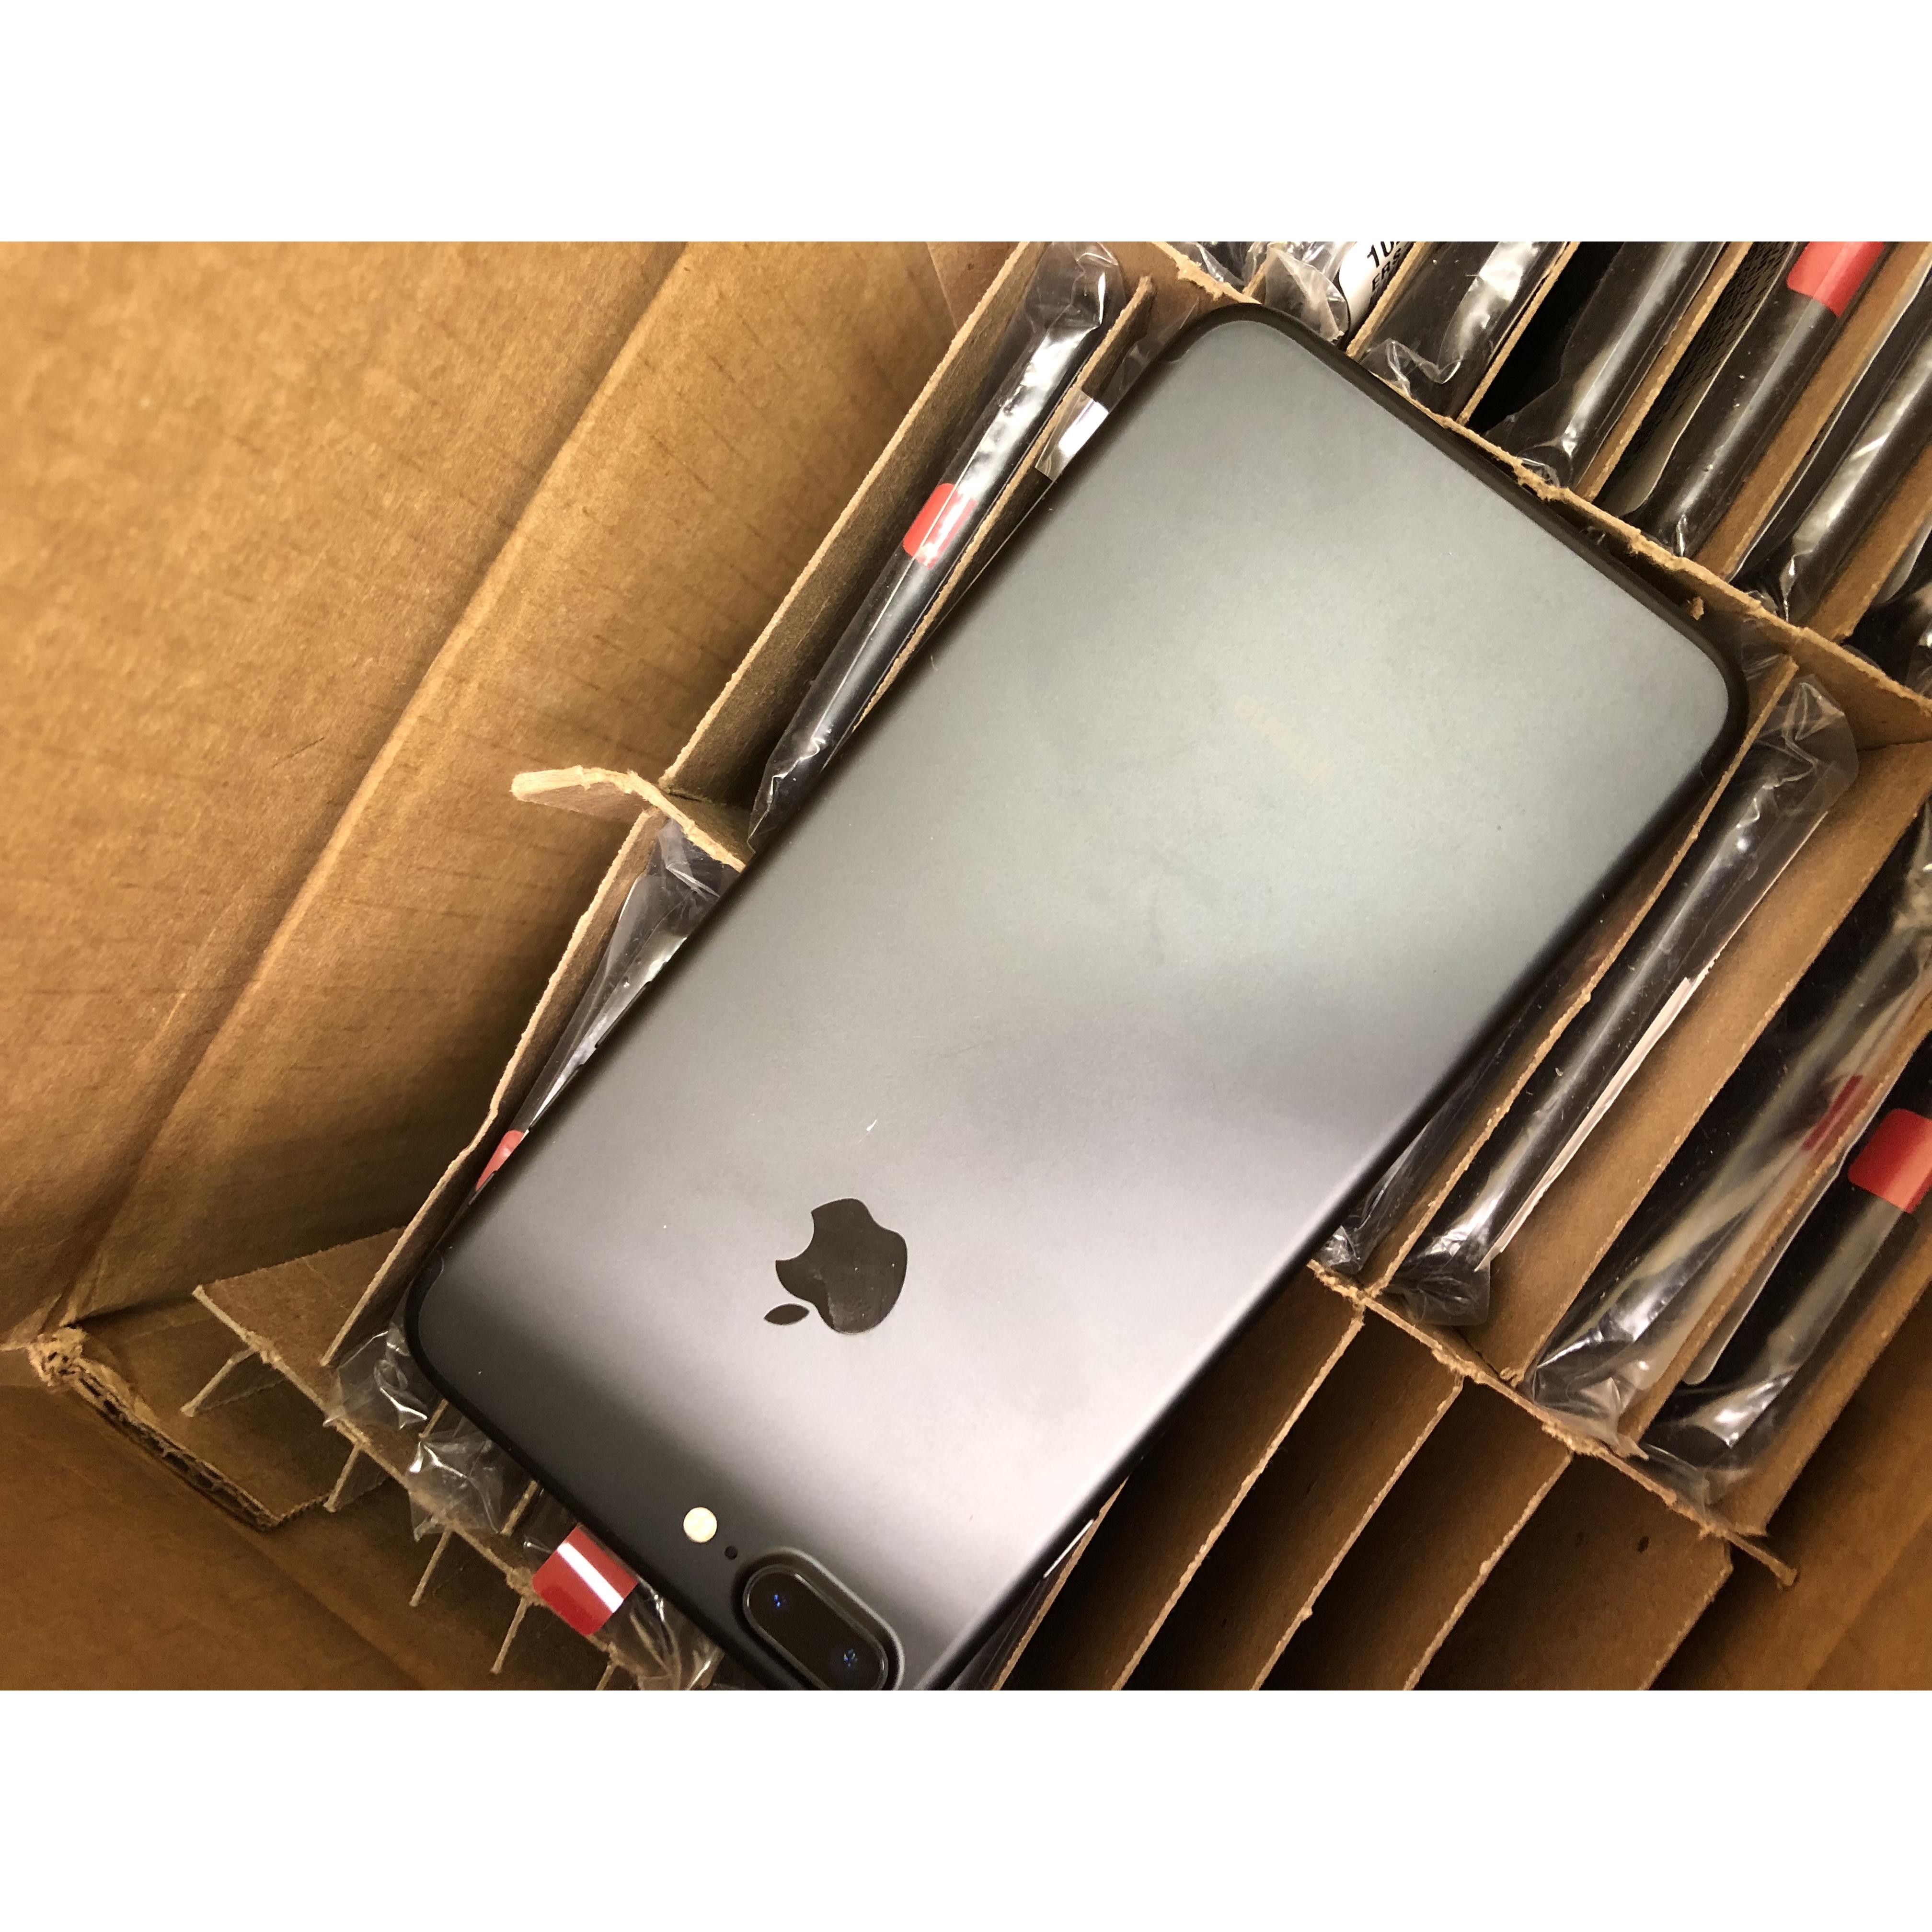 iPhone 5 For Sale, Used and Refurbished - Swappa